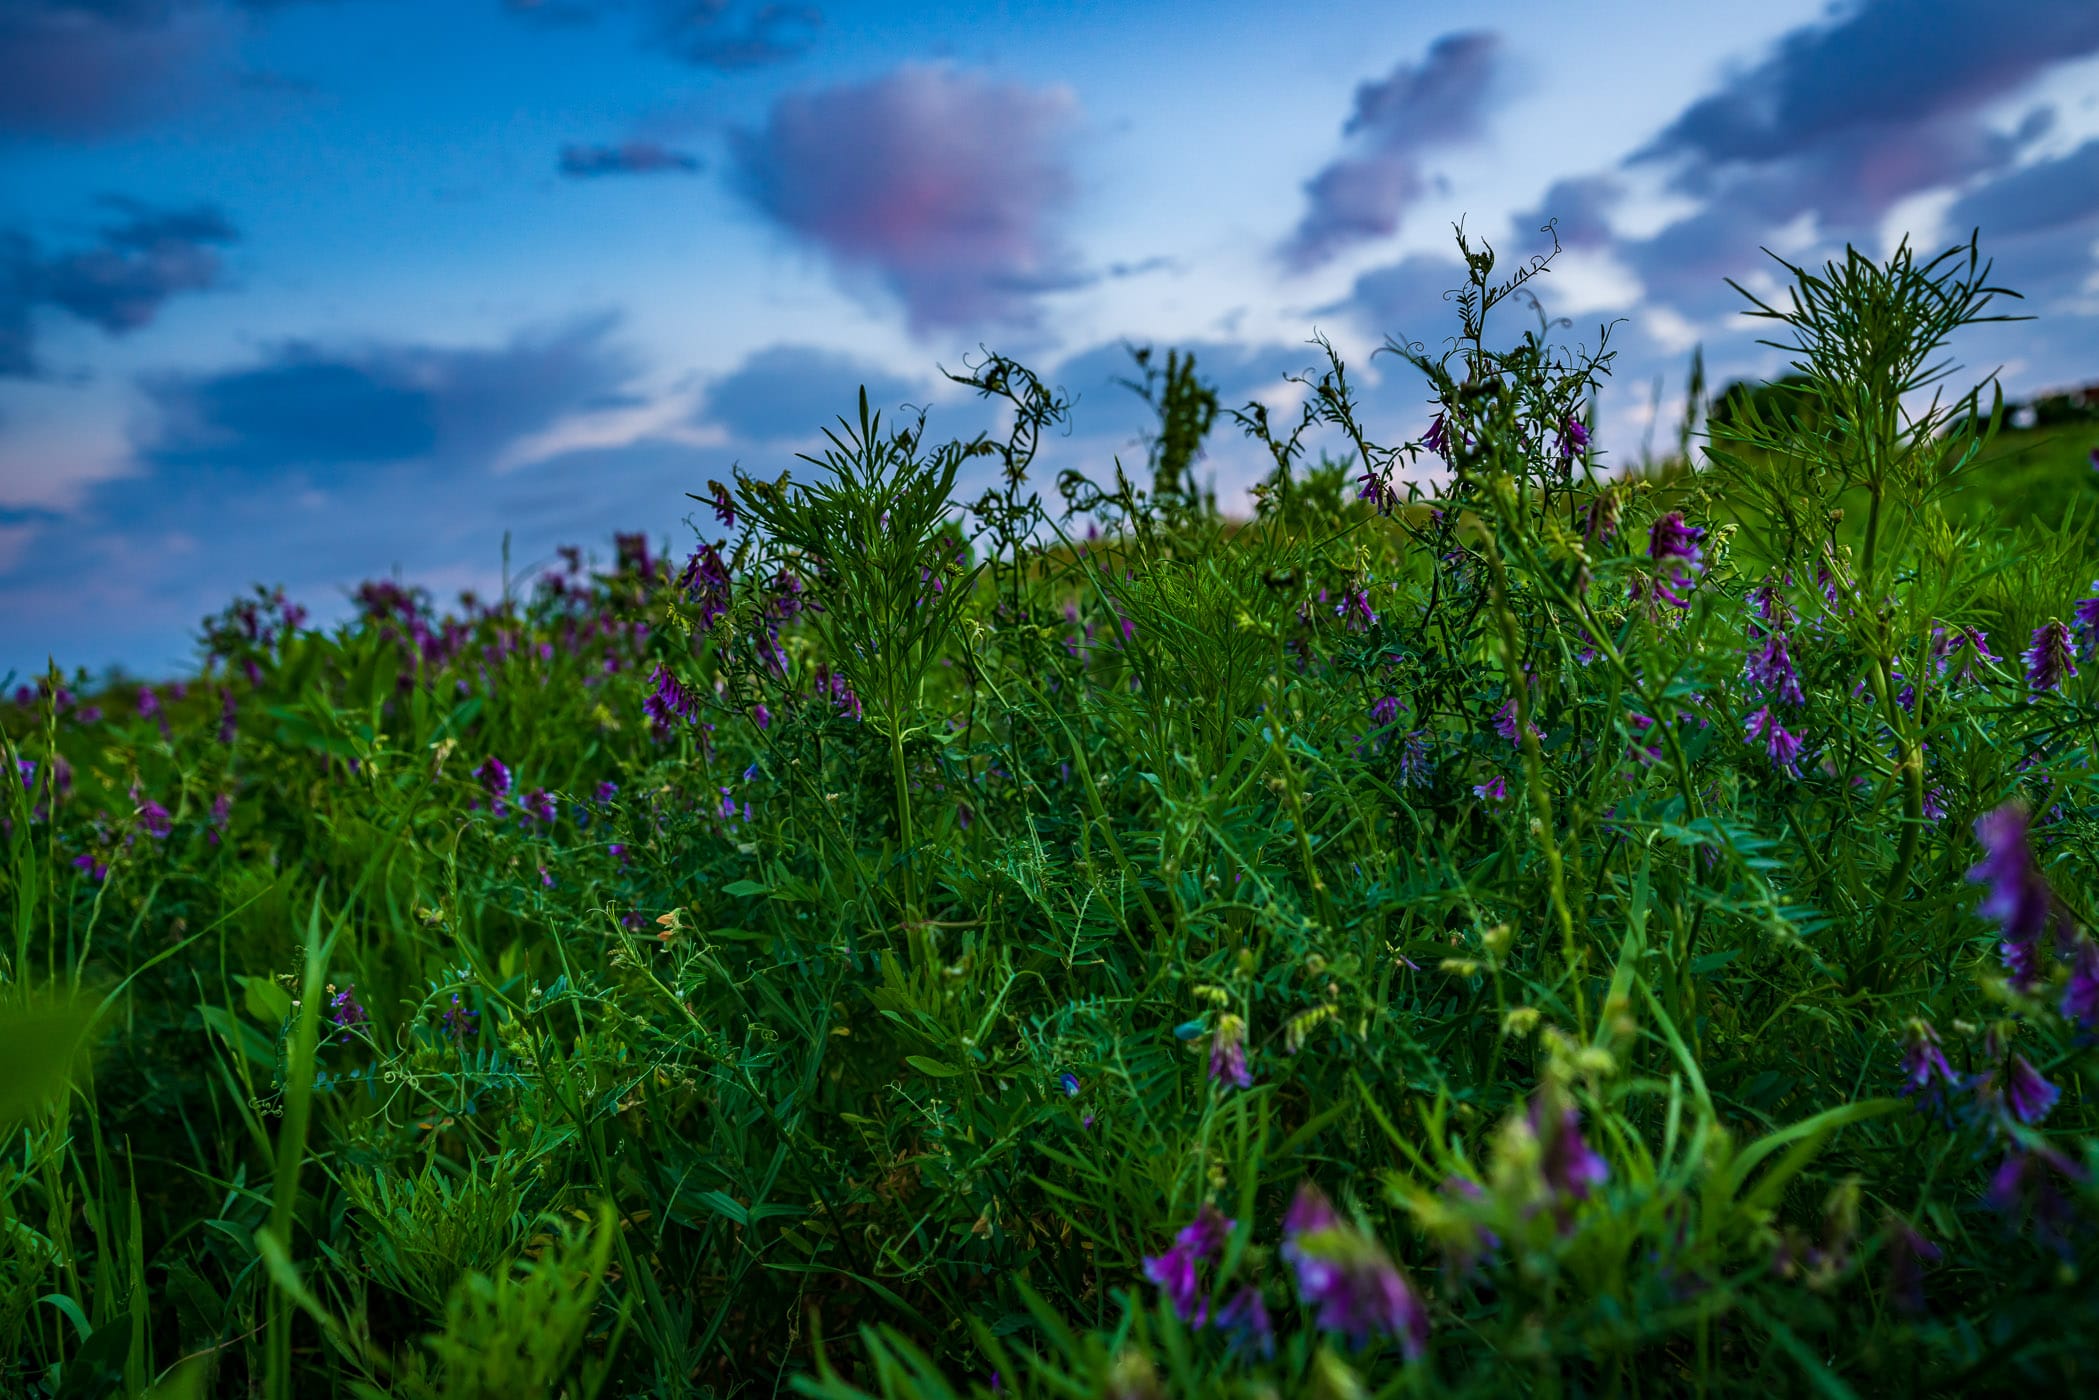 Flowers in a field at North Texas' Hagerman National Wildlife Refuge.